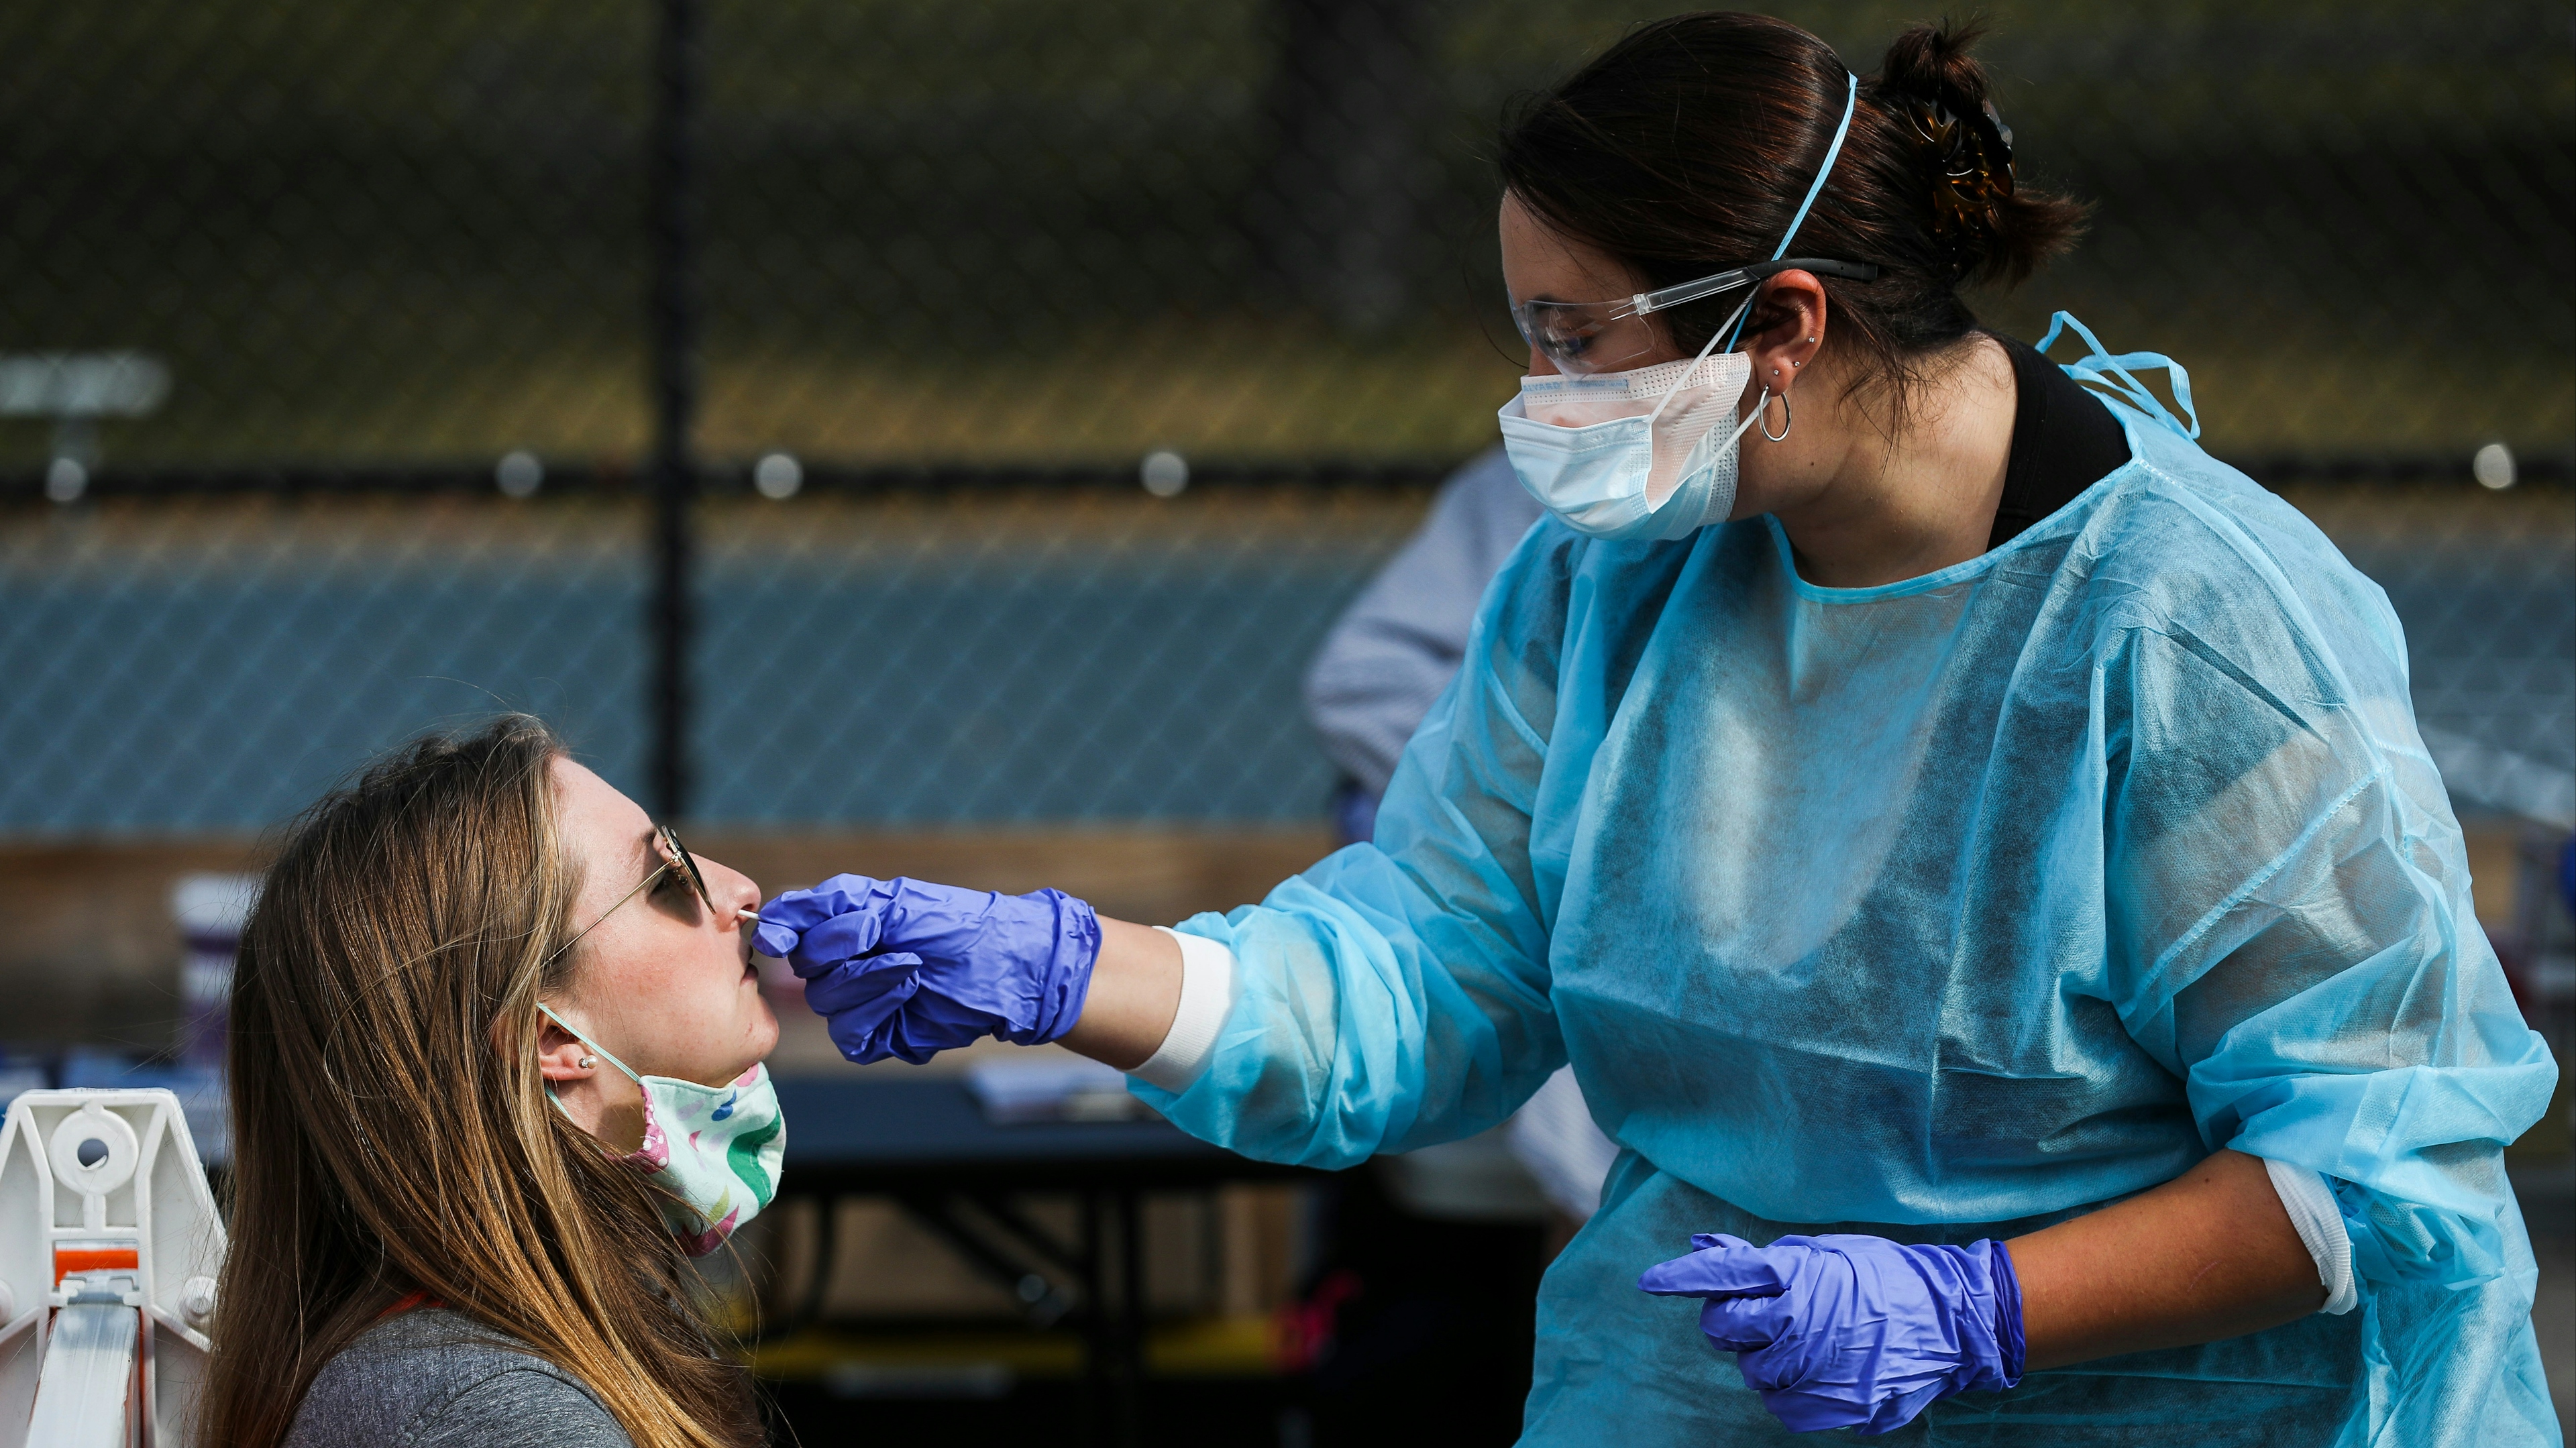 A woman has her nose swabbed at a Stop the Spread COVID-19 testing site in Massachusetts.